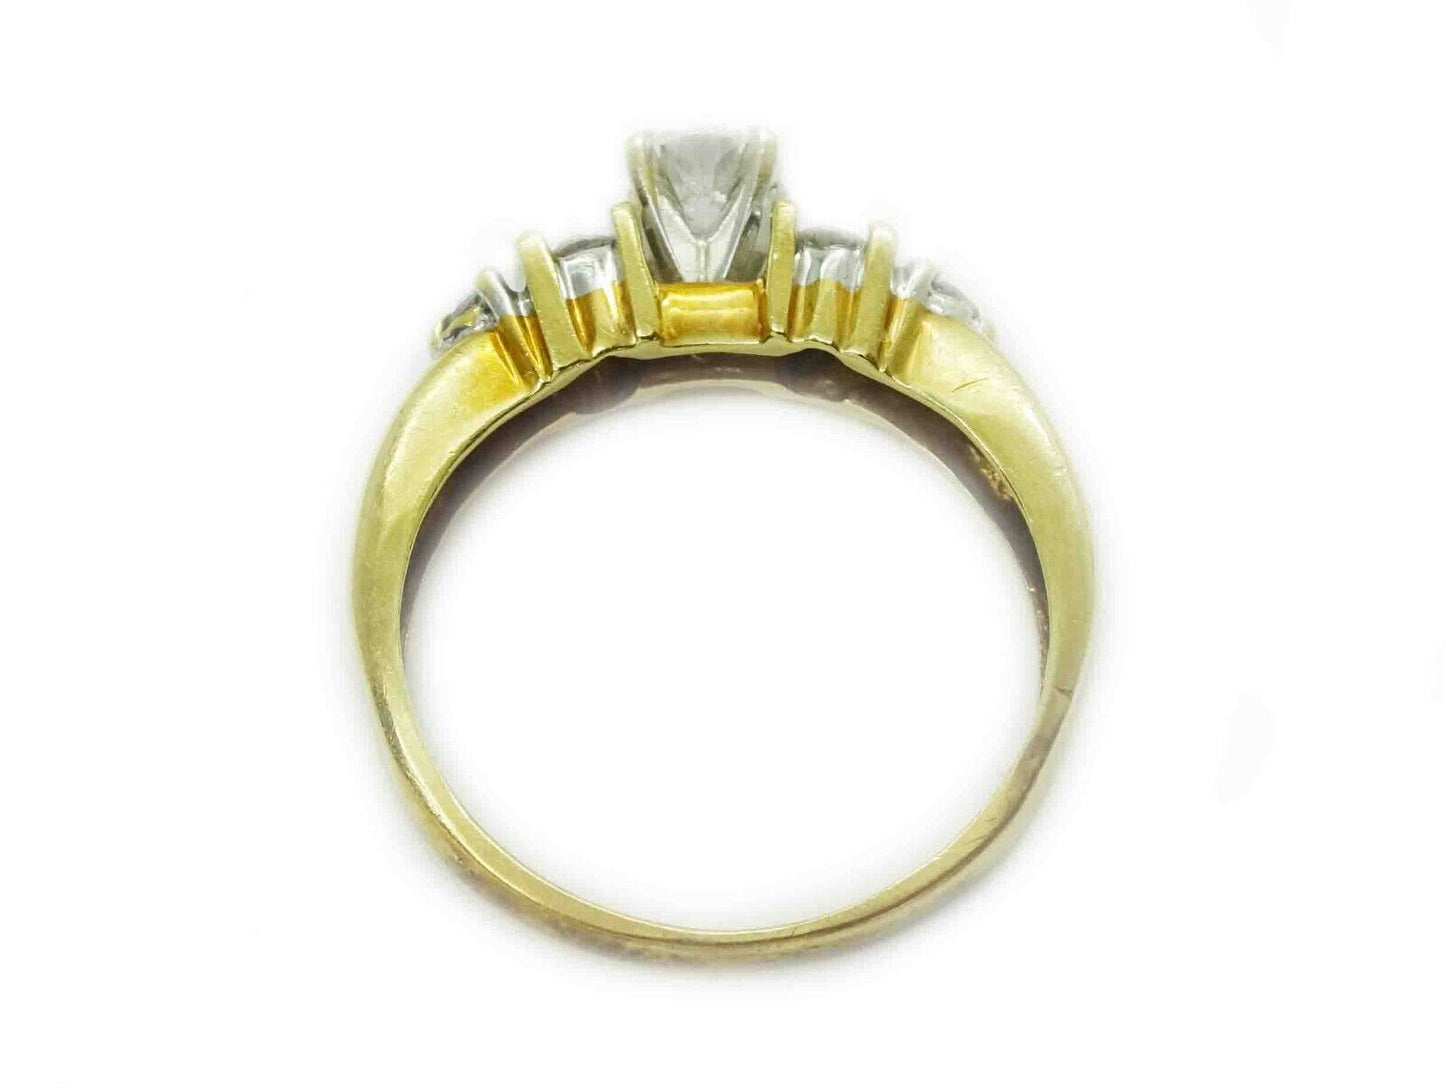 0.38ct tw Natural Earth Mined Diamond Ring 14k Gold Size 6.25